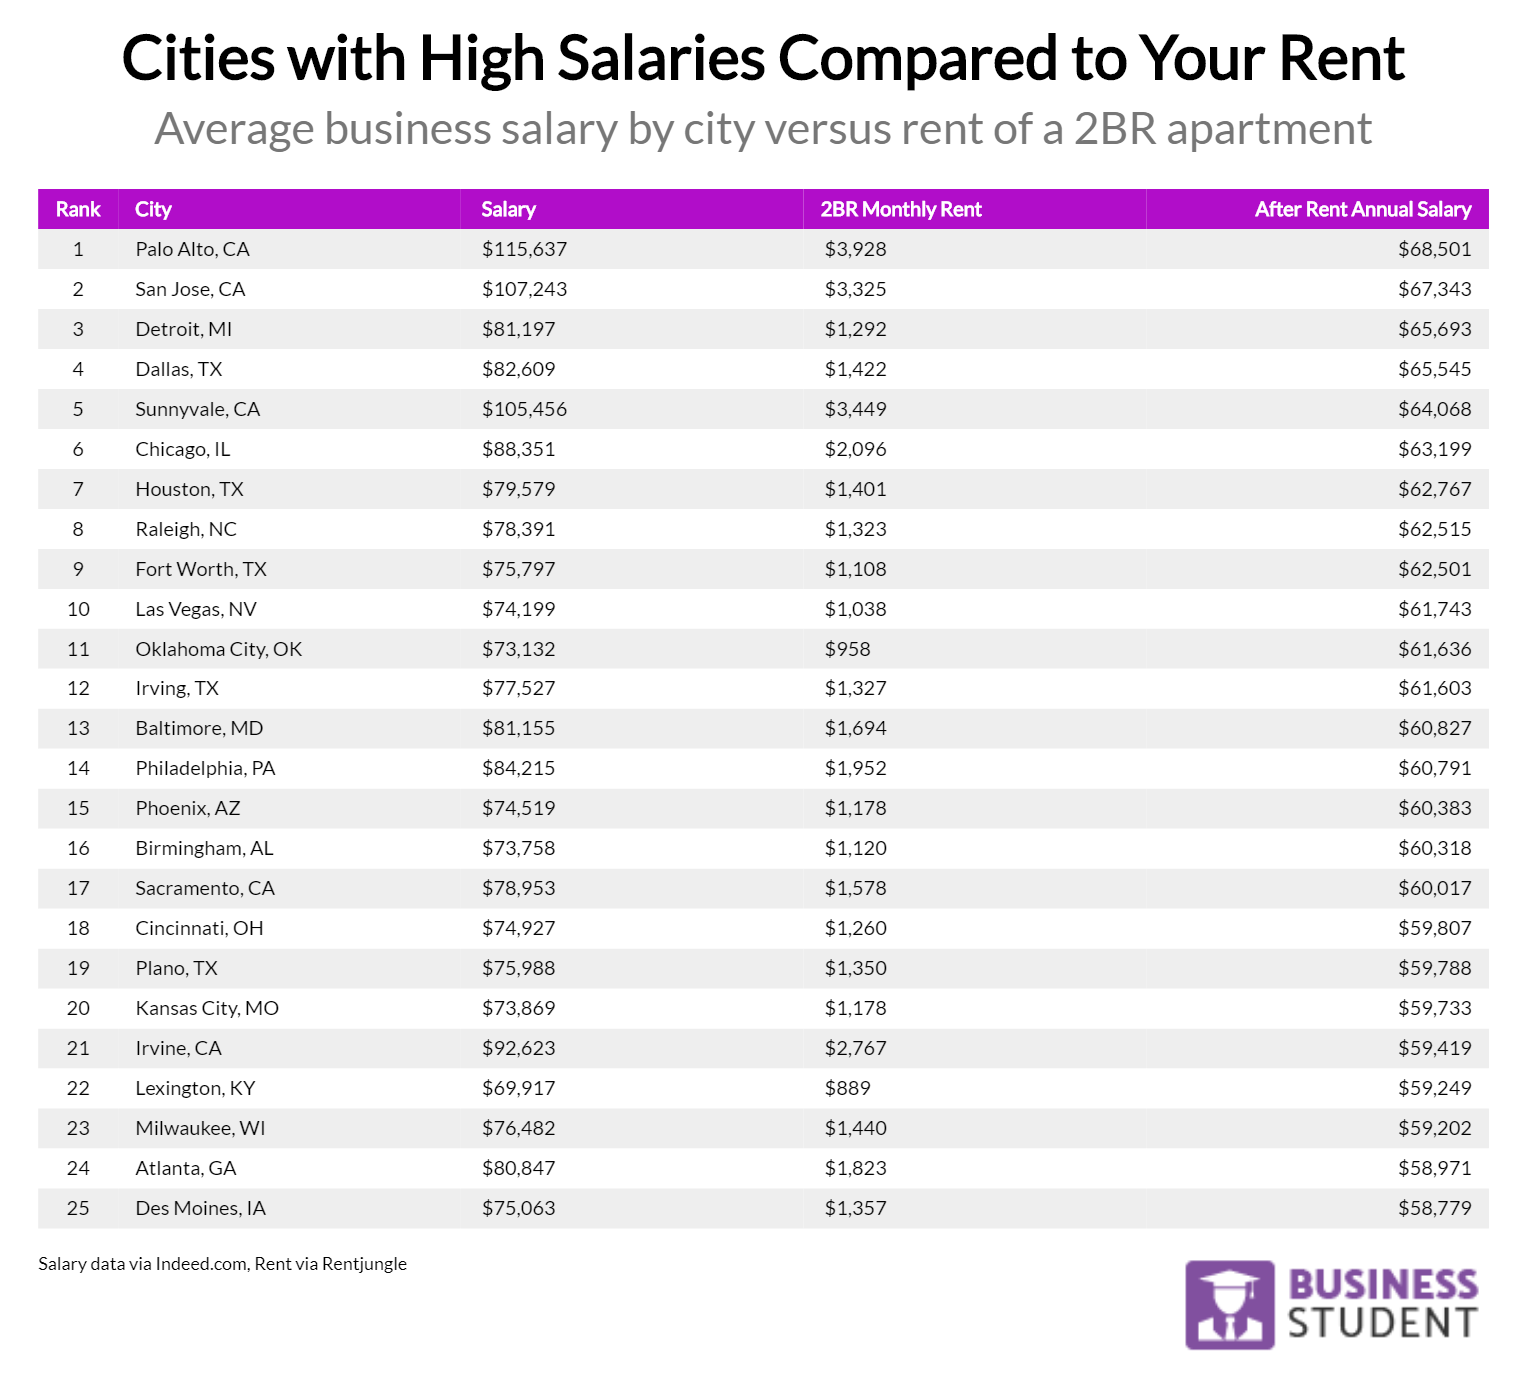 cities with high salaries compared to your rent 2018 09 28T18 08 56.783Z